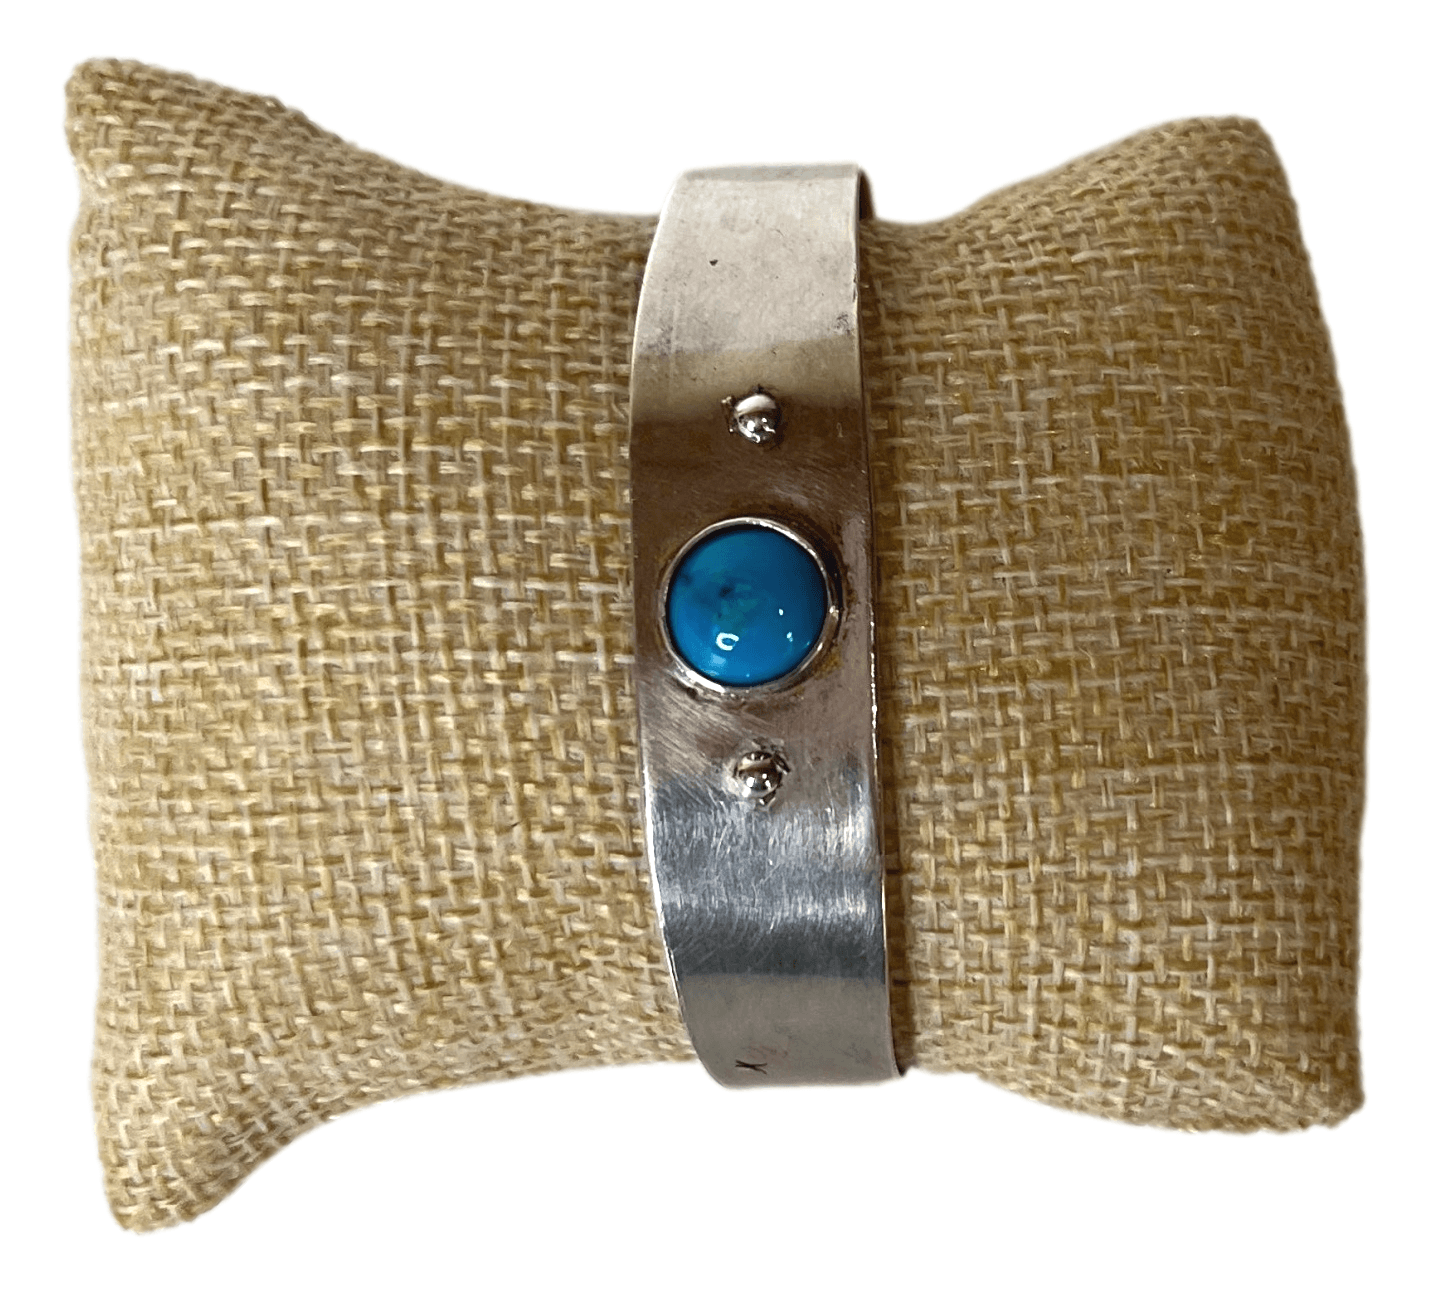 Sterling Silver Bracelet Cuff Round Shape Cut Turquoise Stone in Center Handcrafted By Native American Artist in New Mexico Makers Mark Stamped GJ - Ysleta Mission Gift Shop- VOTED El Paso's Best Gift Shop